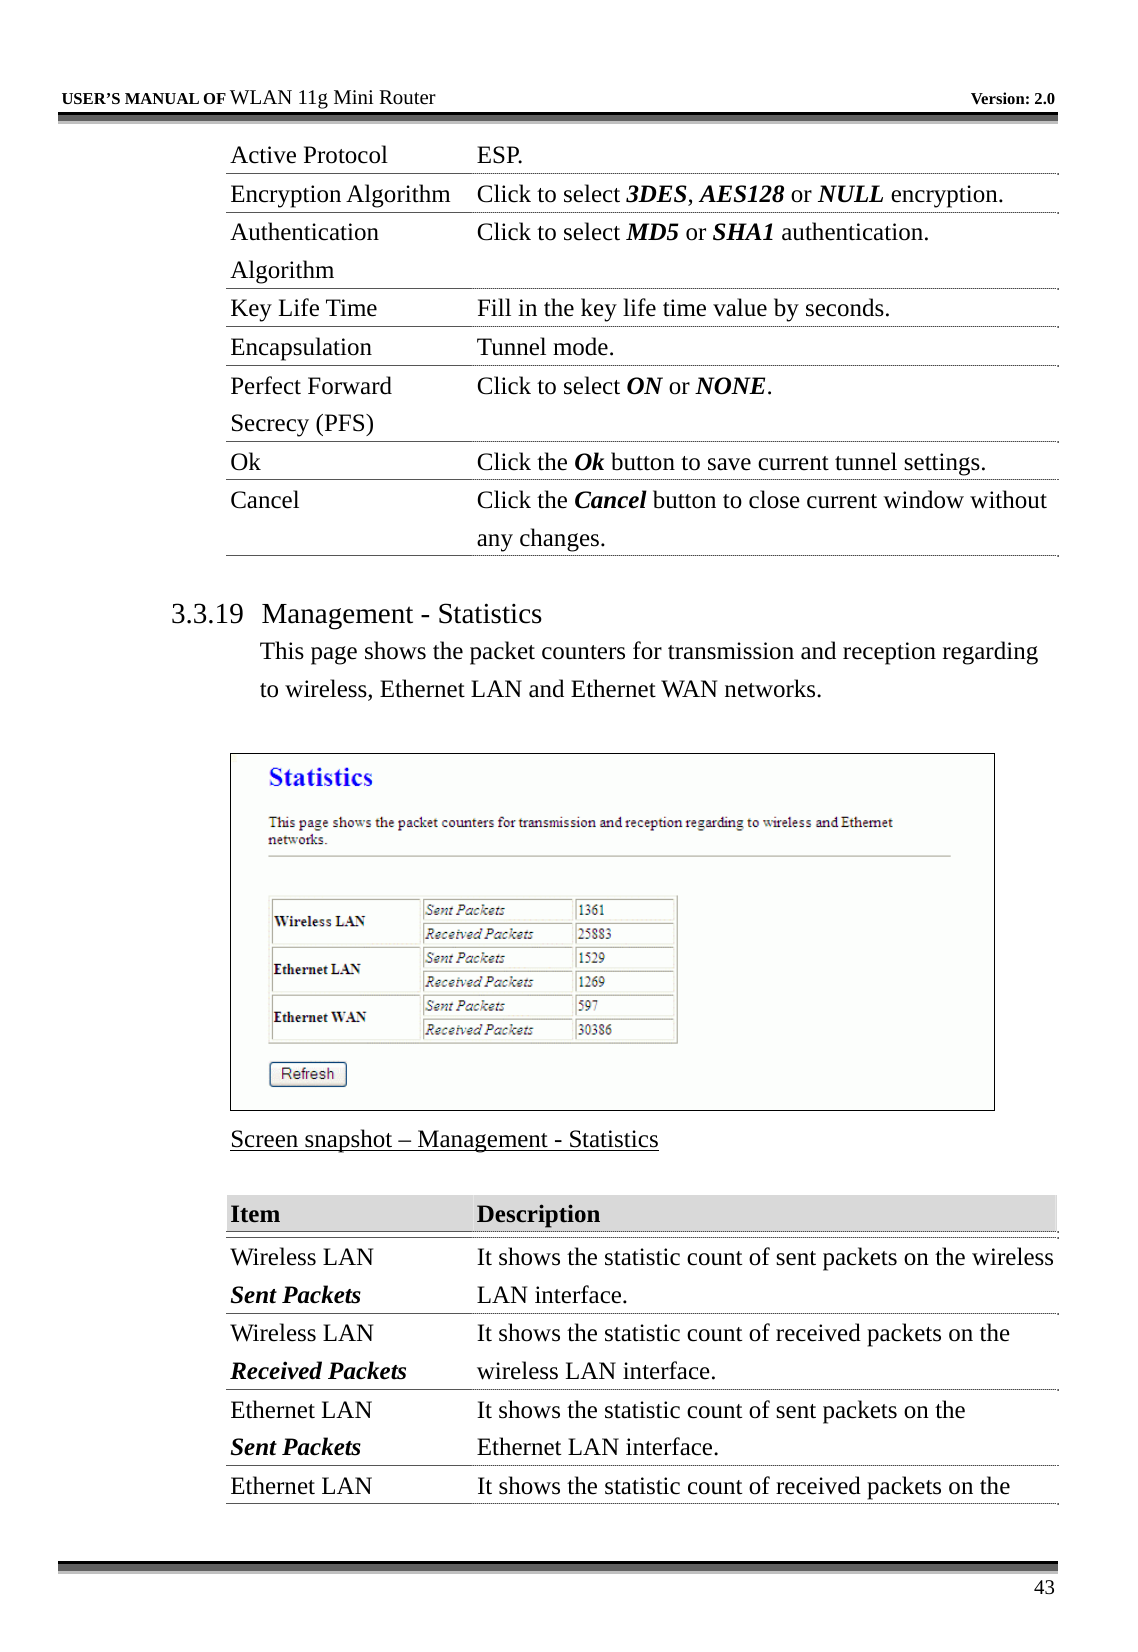   USER’S MANUAL OF WLAN 11g Mini Router   Version: 2.0     43 Active Protocol  ESP. Encryption Algorithm  Click to select 3DES, AES128 or NULL encryption. Authentication Algorithm Click to select MD5 or SHA1 authentication. Key Life Time  Fill in the key life time value by seconds. Encapsulation Tunnel mode. Perfect Forward Secrecy (PFS) Click to select ON or NONE. Ok Click the Ok button to save current tunnel settings. Cancel Click the Cancel button to close current window without any changes.  3.3.19  Management - Statistics This page shows the packet counters for transmission and reception regarding to wireless, Ethernet LAN and Ethernet WAN networks.   Screen snapshot – Management - Statistics  Item  Description   Wireless LAN Sent Packets It shows the statistic count of sent packets on the wireless LAN interface. Wireless LAN Received Packets It shows the statistic count of received packets on the wireless LAN interface. Ethernet LAN Sent Packets It shows the statistic count of sent packets on the Ethernet LAN interface. Ethernet LAN  It shows the statistic count of received packets on the 